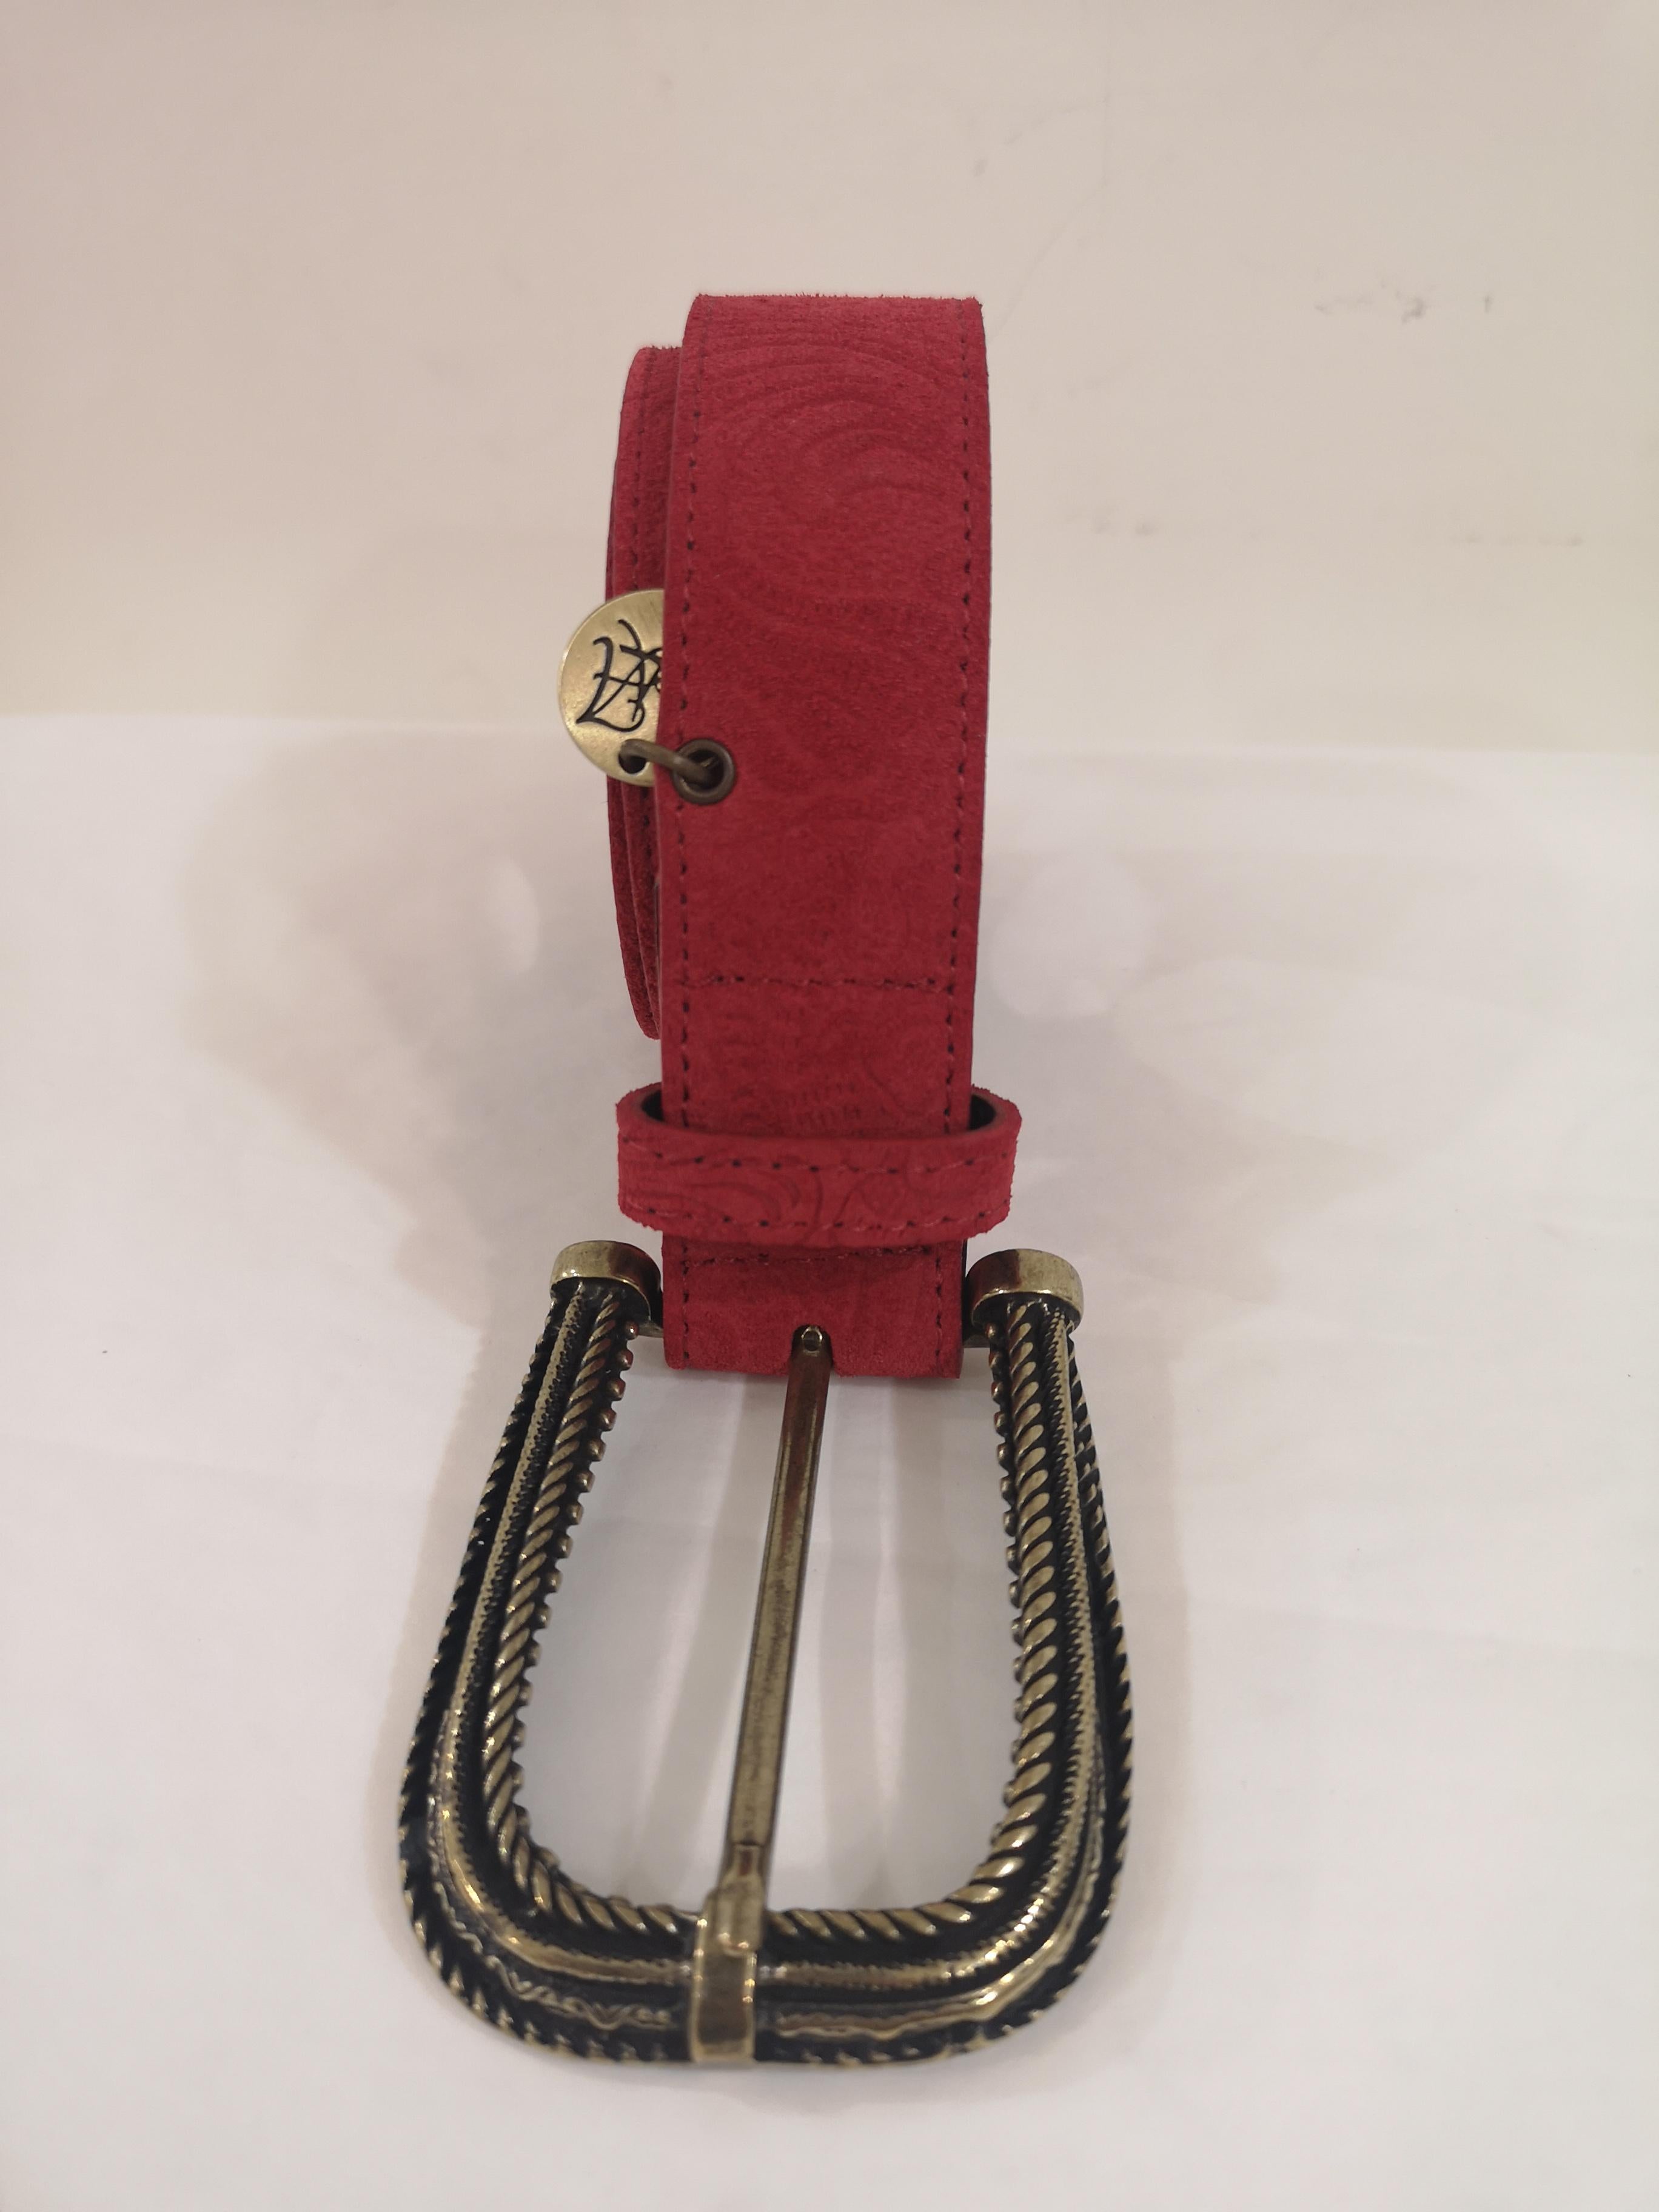 Women's or Men's Red leather suede belt NWOT